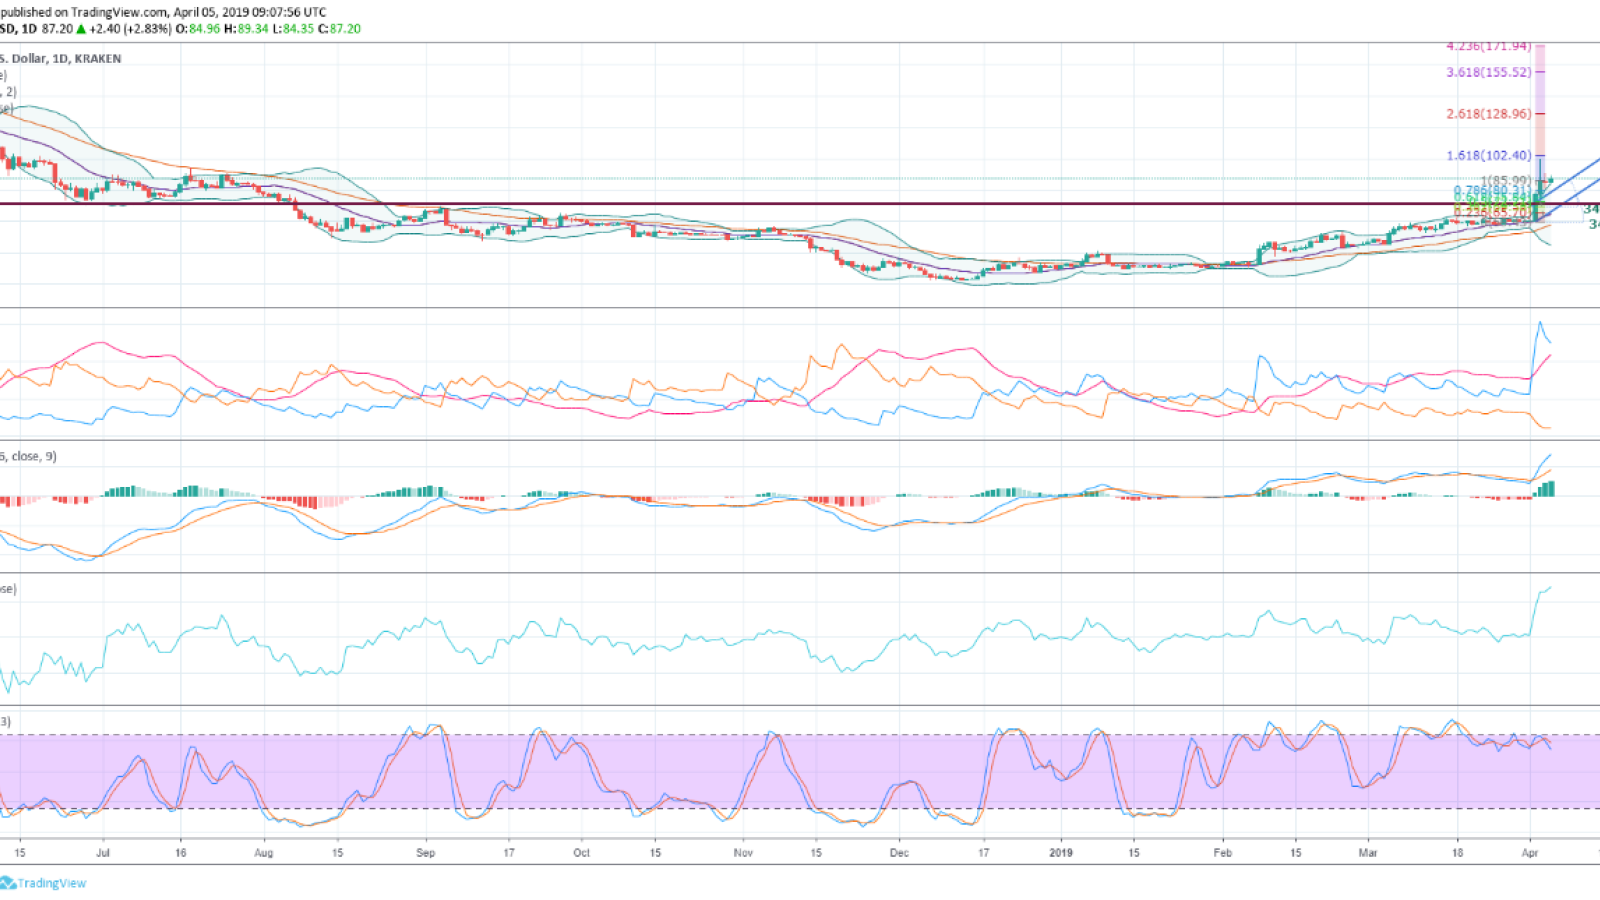 Litecoin price prediction based on daily chart